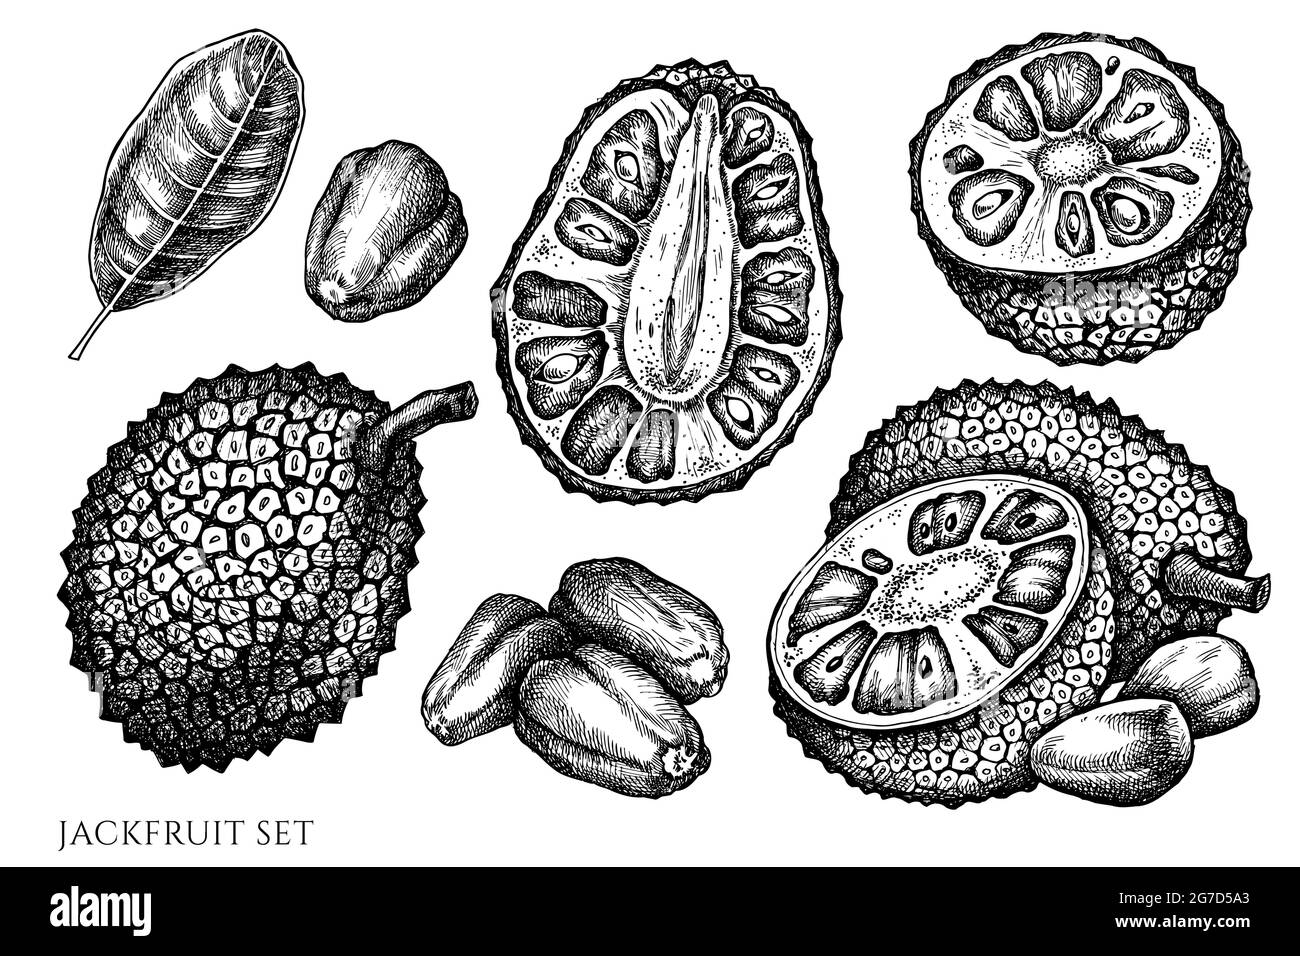 The Jackfruit Also Known As Jack Tree Hand Draw Sketch Vector Stock  Vector  Illustration of fruit graphic 182406910